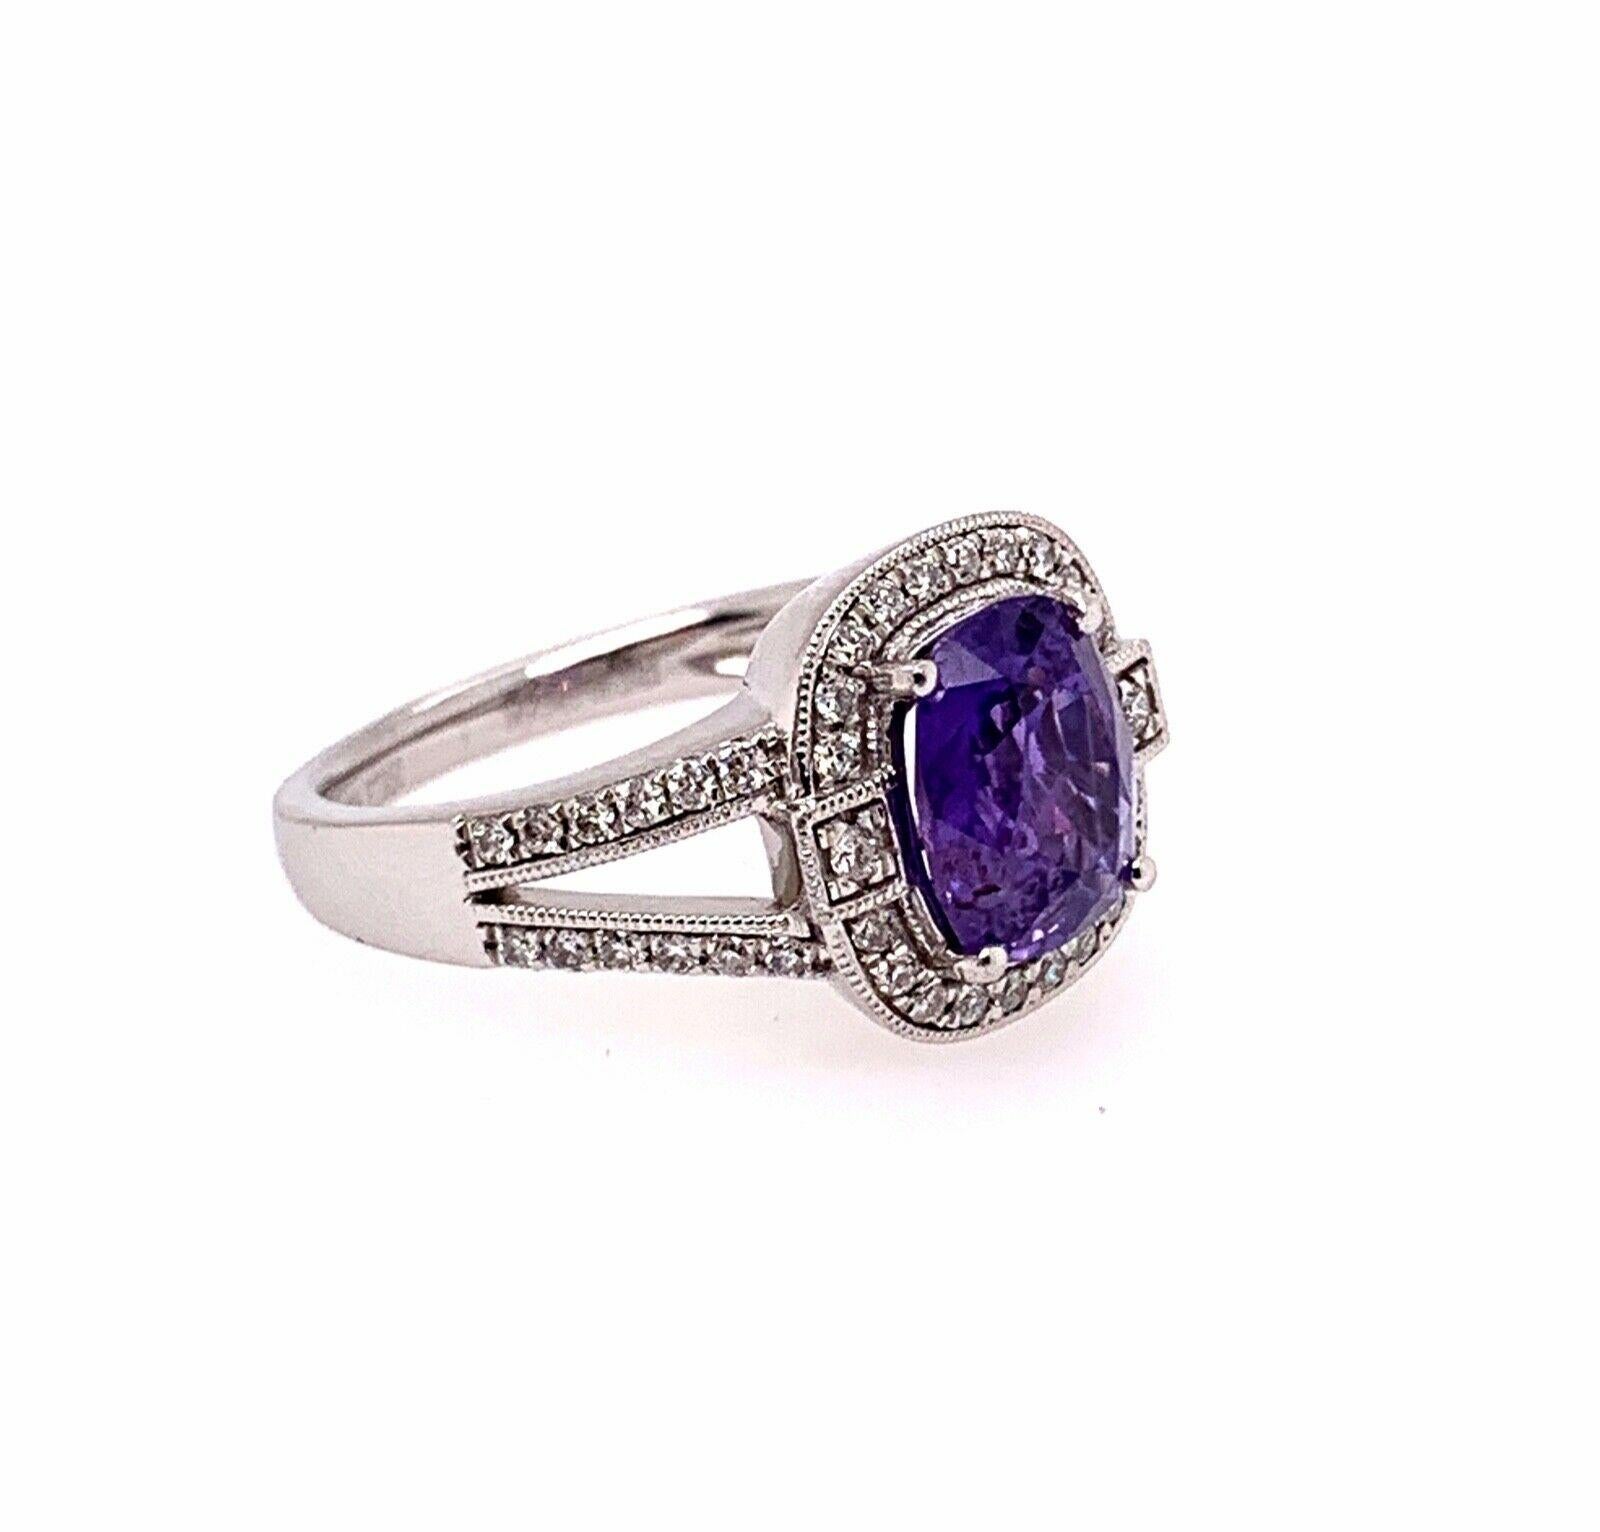 Rare Unheated Color Change Sapphire and Diamond 2.86 Carat Orianne Plat Ring GIA For Sale 2